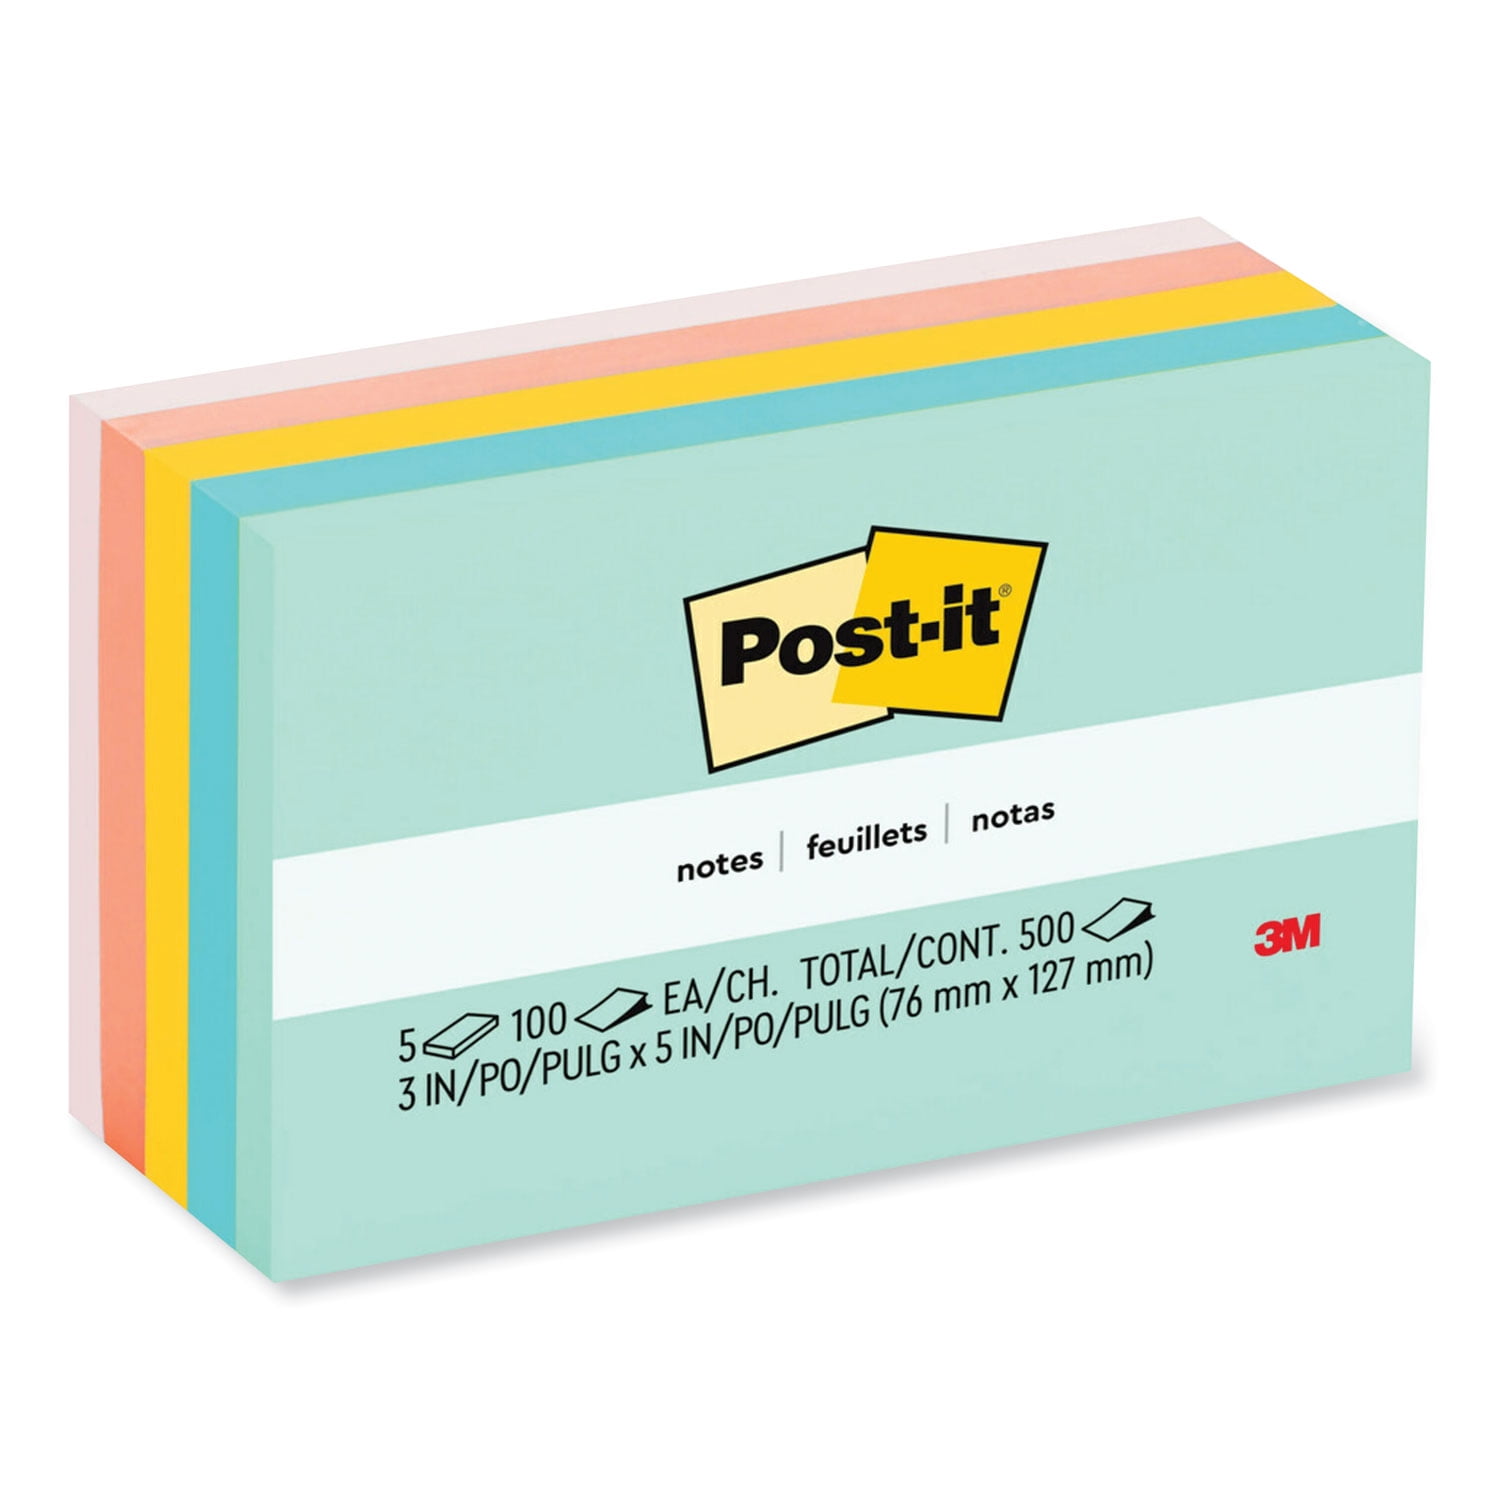 3M Post-it Notes, Original Pads, 3 x 3 Inches, 100 Sheets per Pad, 2-Pack, Canary (MMM654YW)